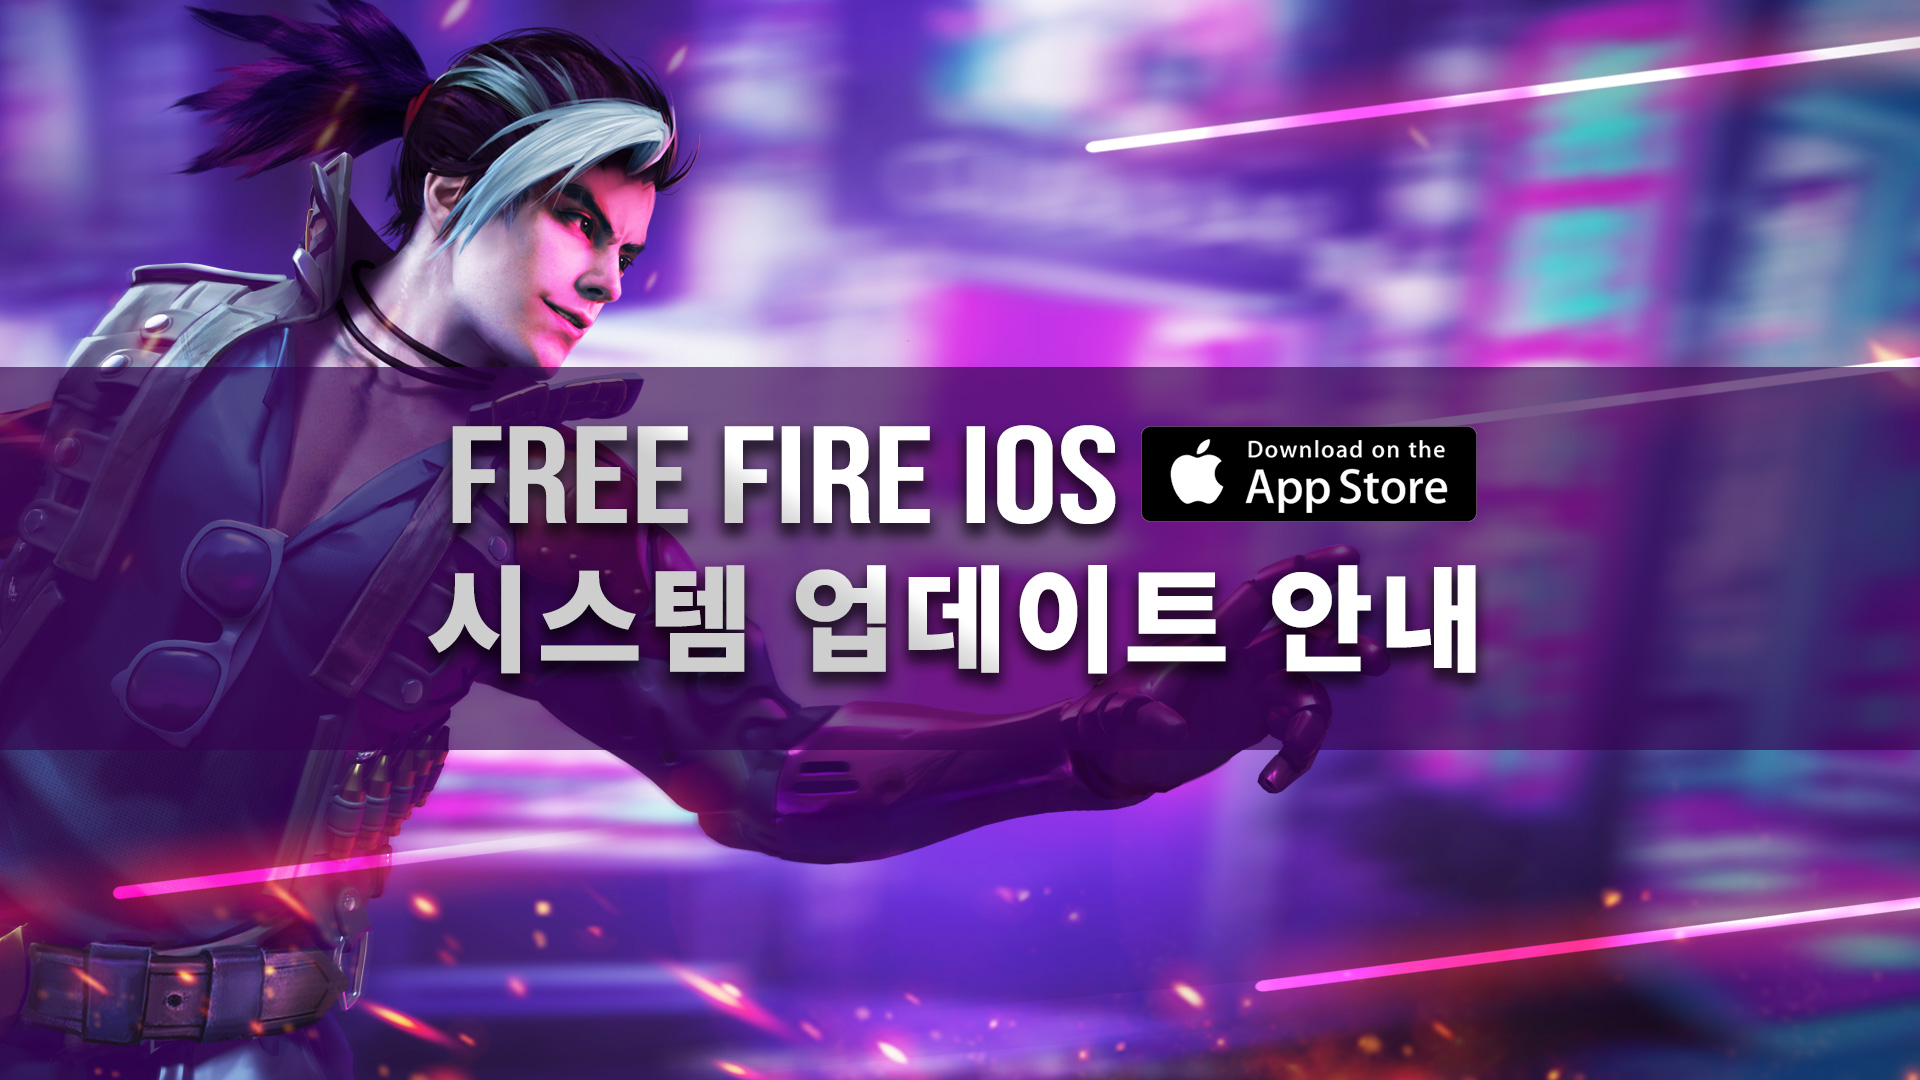 Free Fire - Free Fire World Cup!